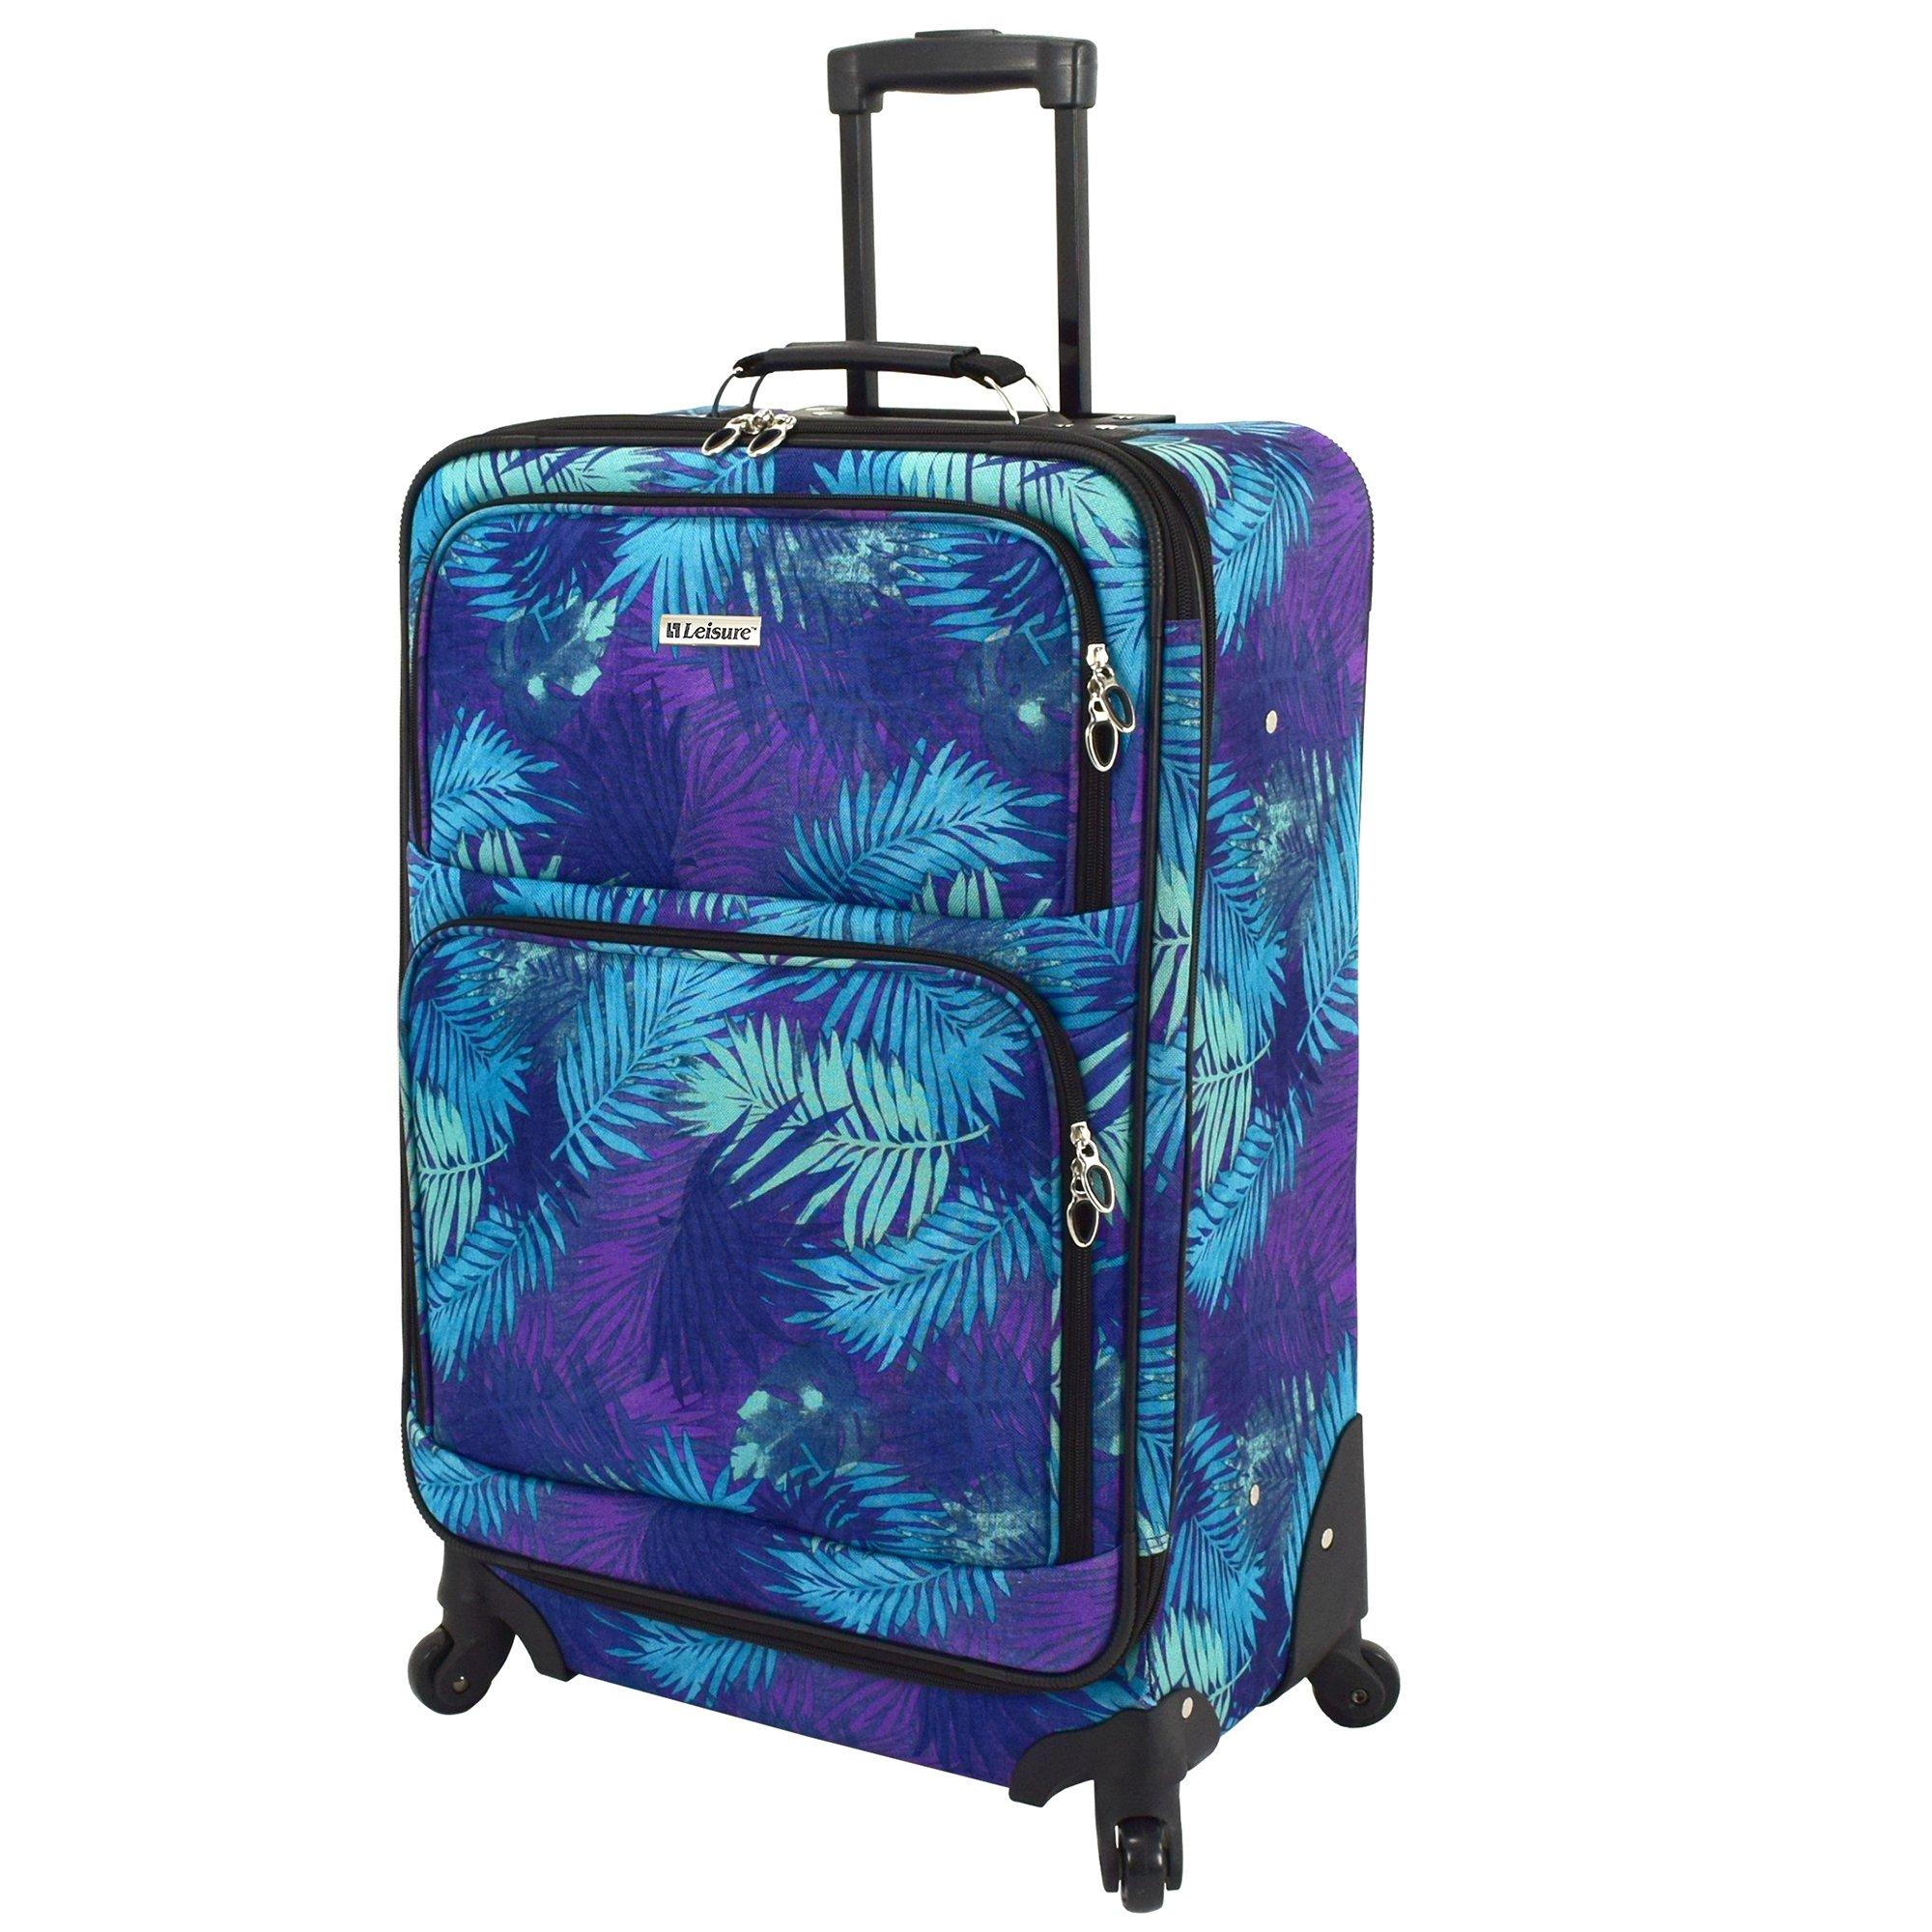 Leisure Luggage 25'' Lafayette Palm Frond Spinner Luggage - Purple/Blue - Luggage 25 Inches